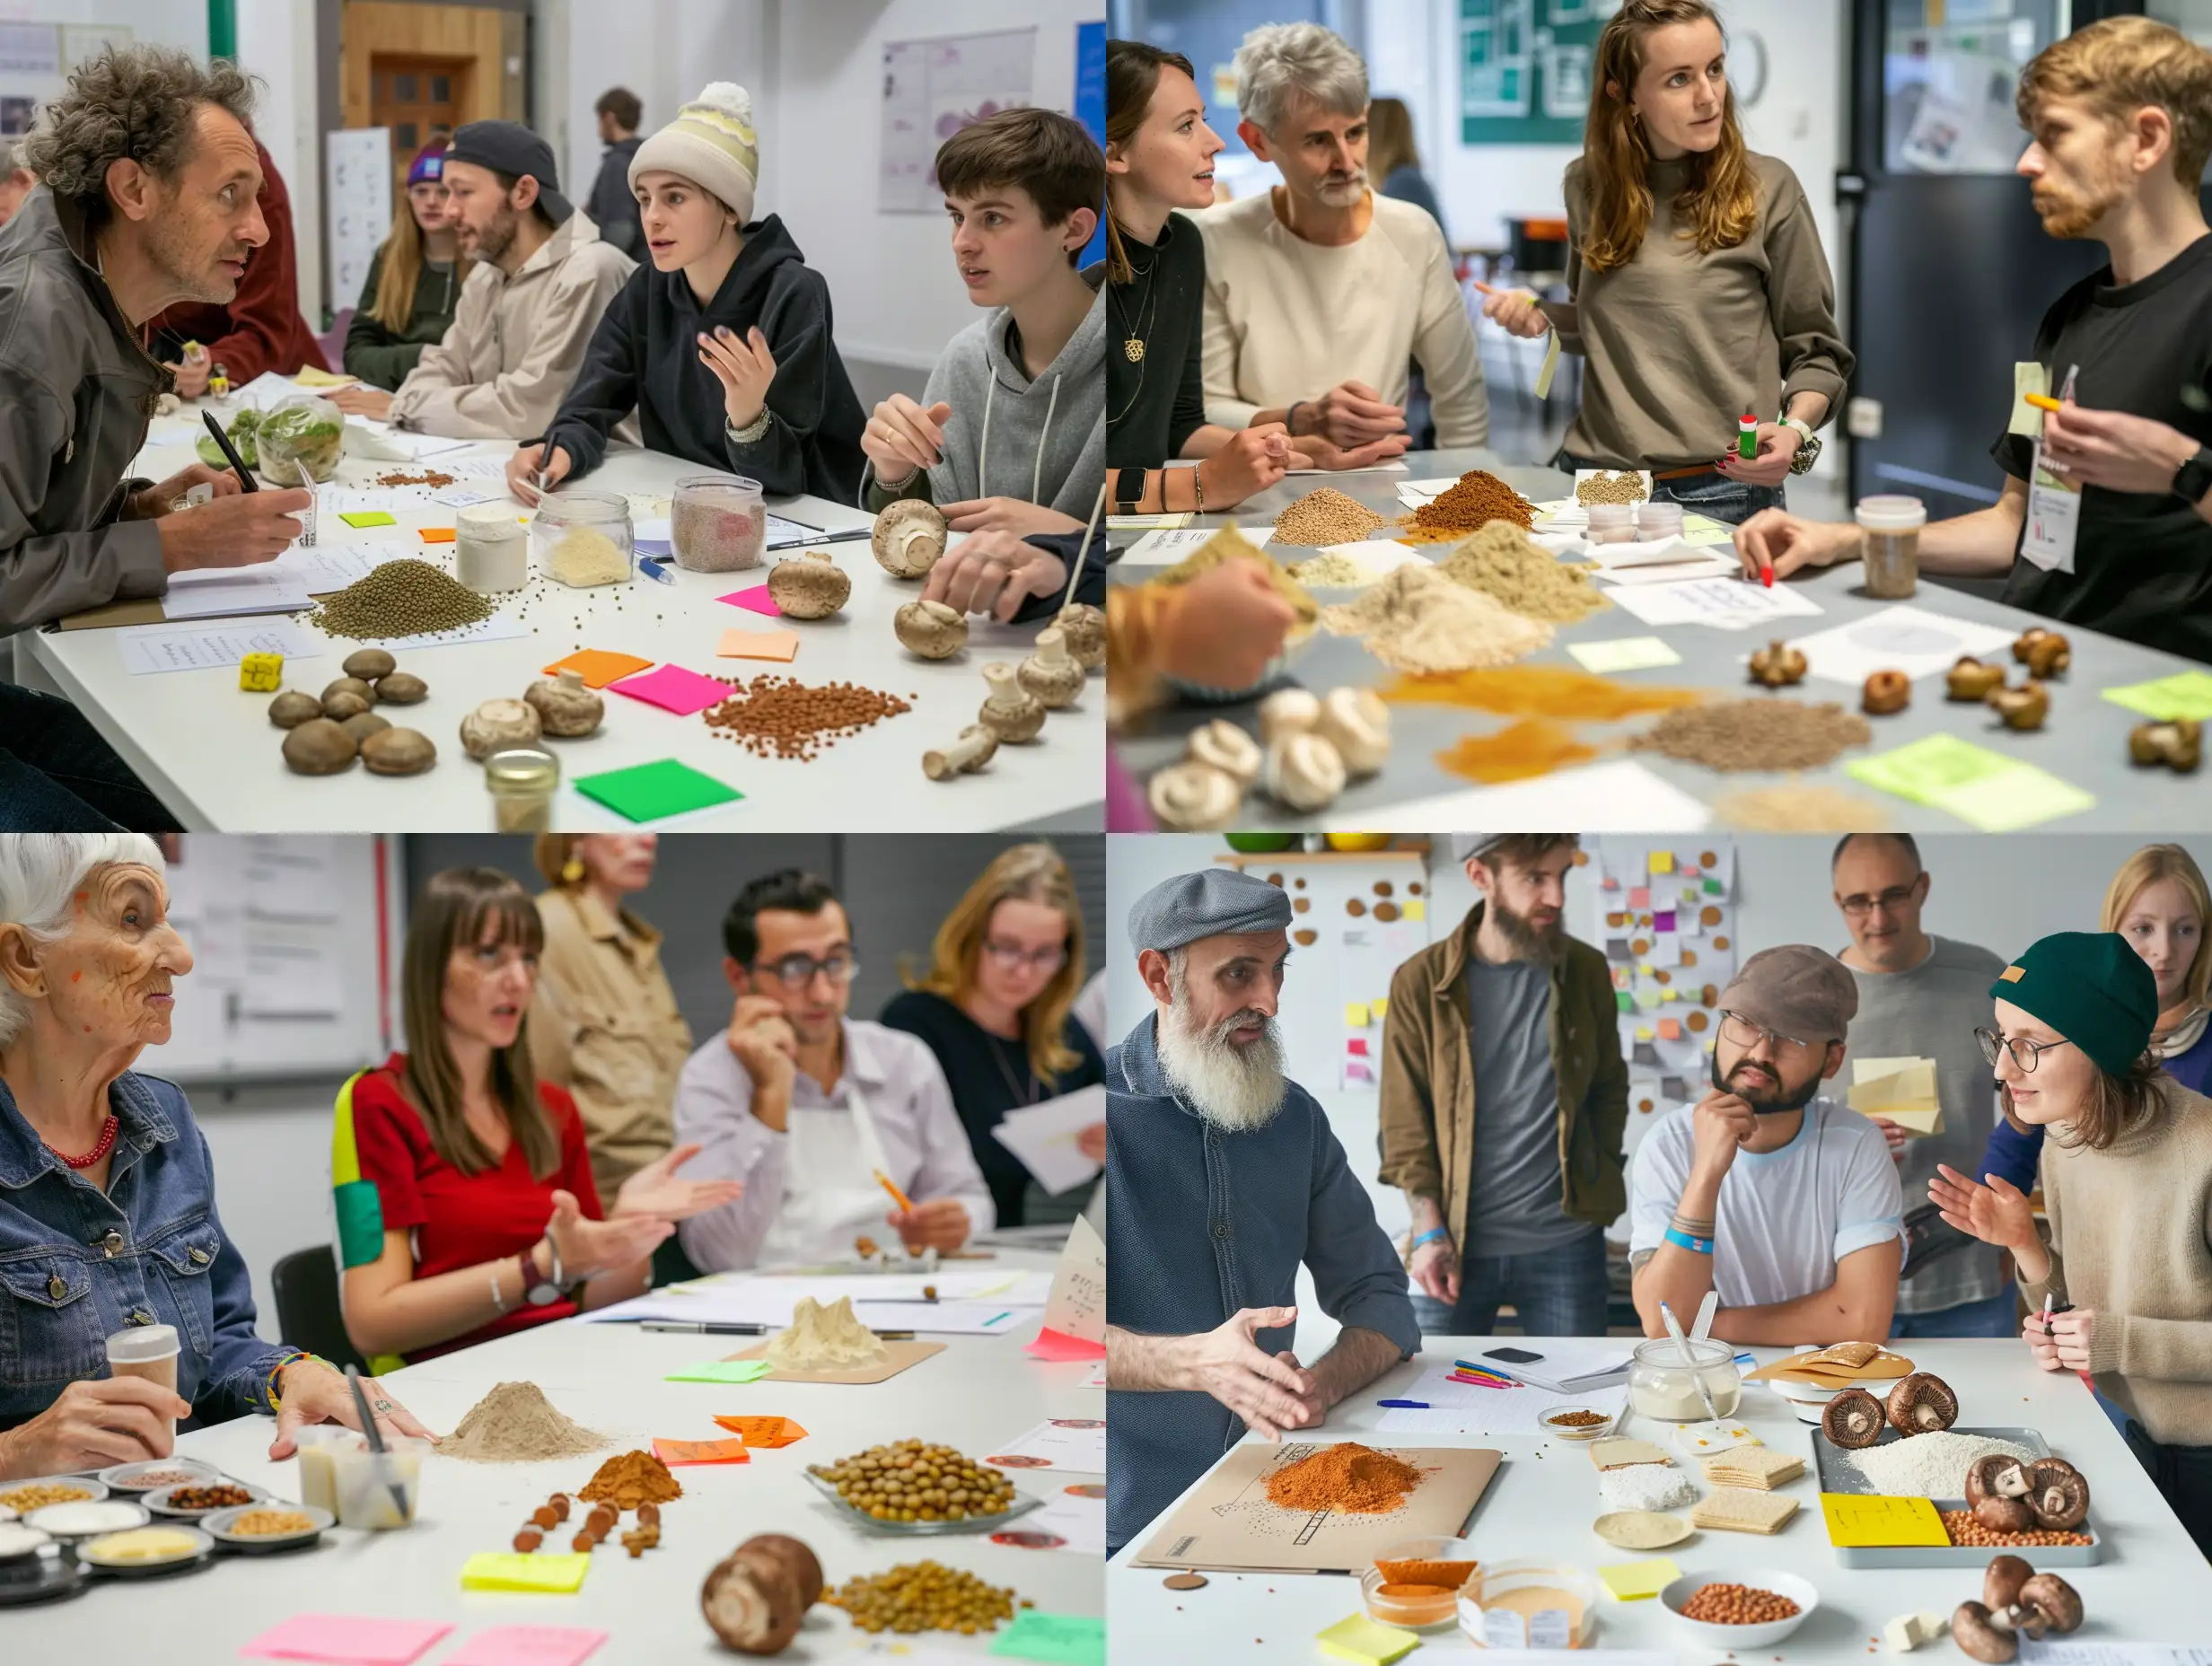 diverse team of young, middle-aged and old people dressed casually working and speaking together in co-working space with a few small portions of food like tofu, lentils, mushrooms, and powder on the table as well as papers post-its and pens
